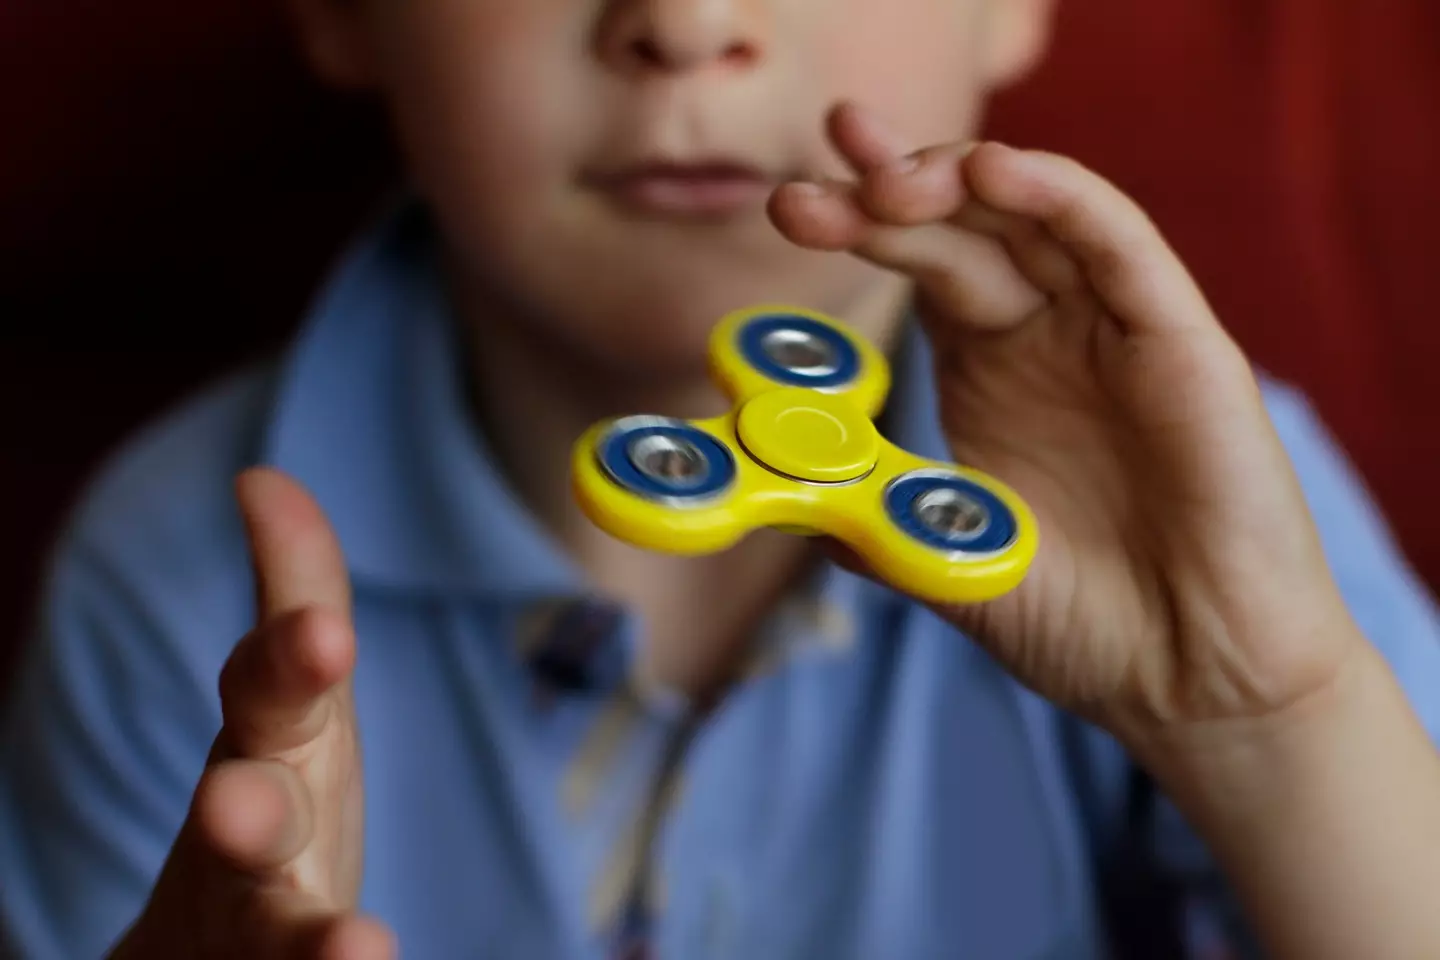 Fidget spinners reached their peak of popularity back in 2017.